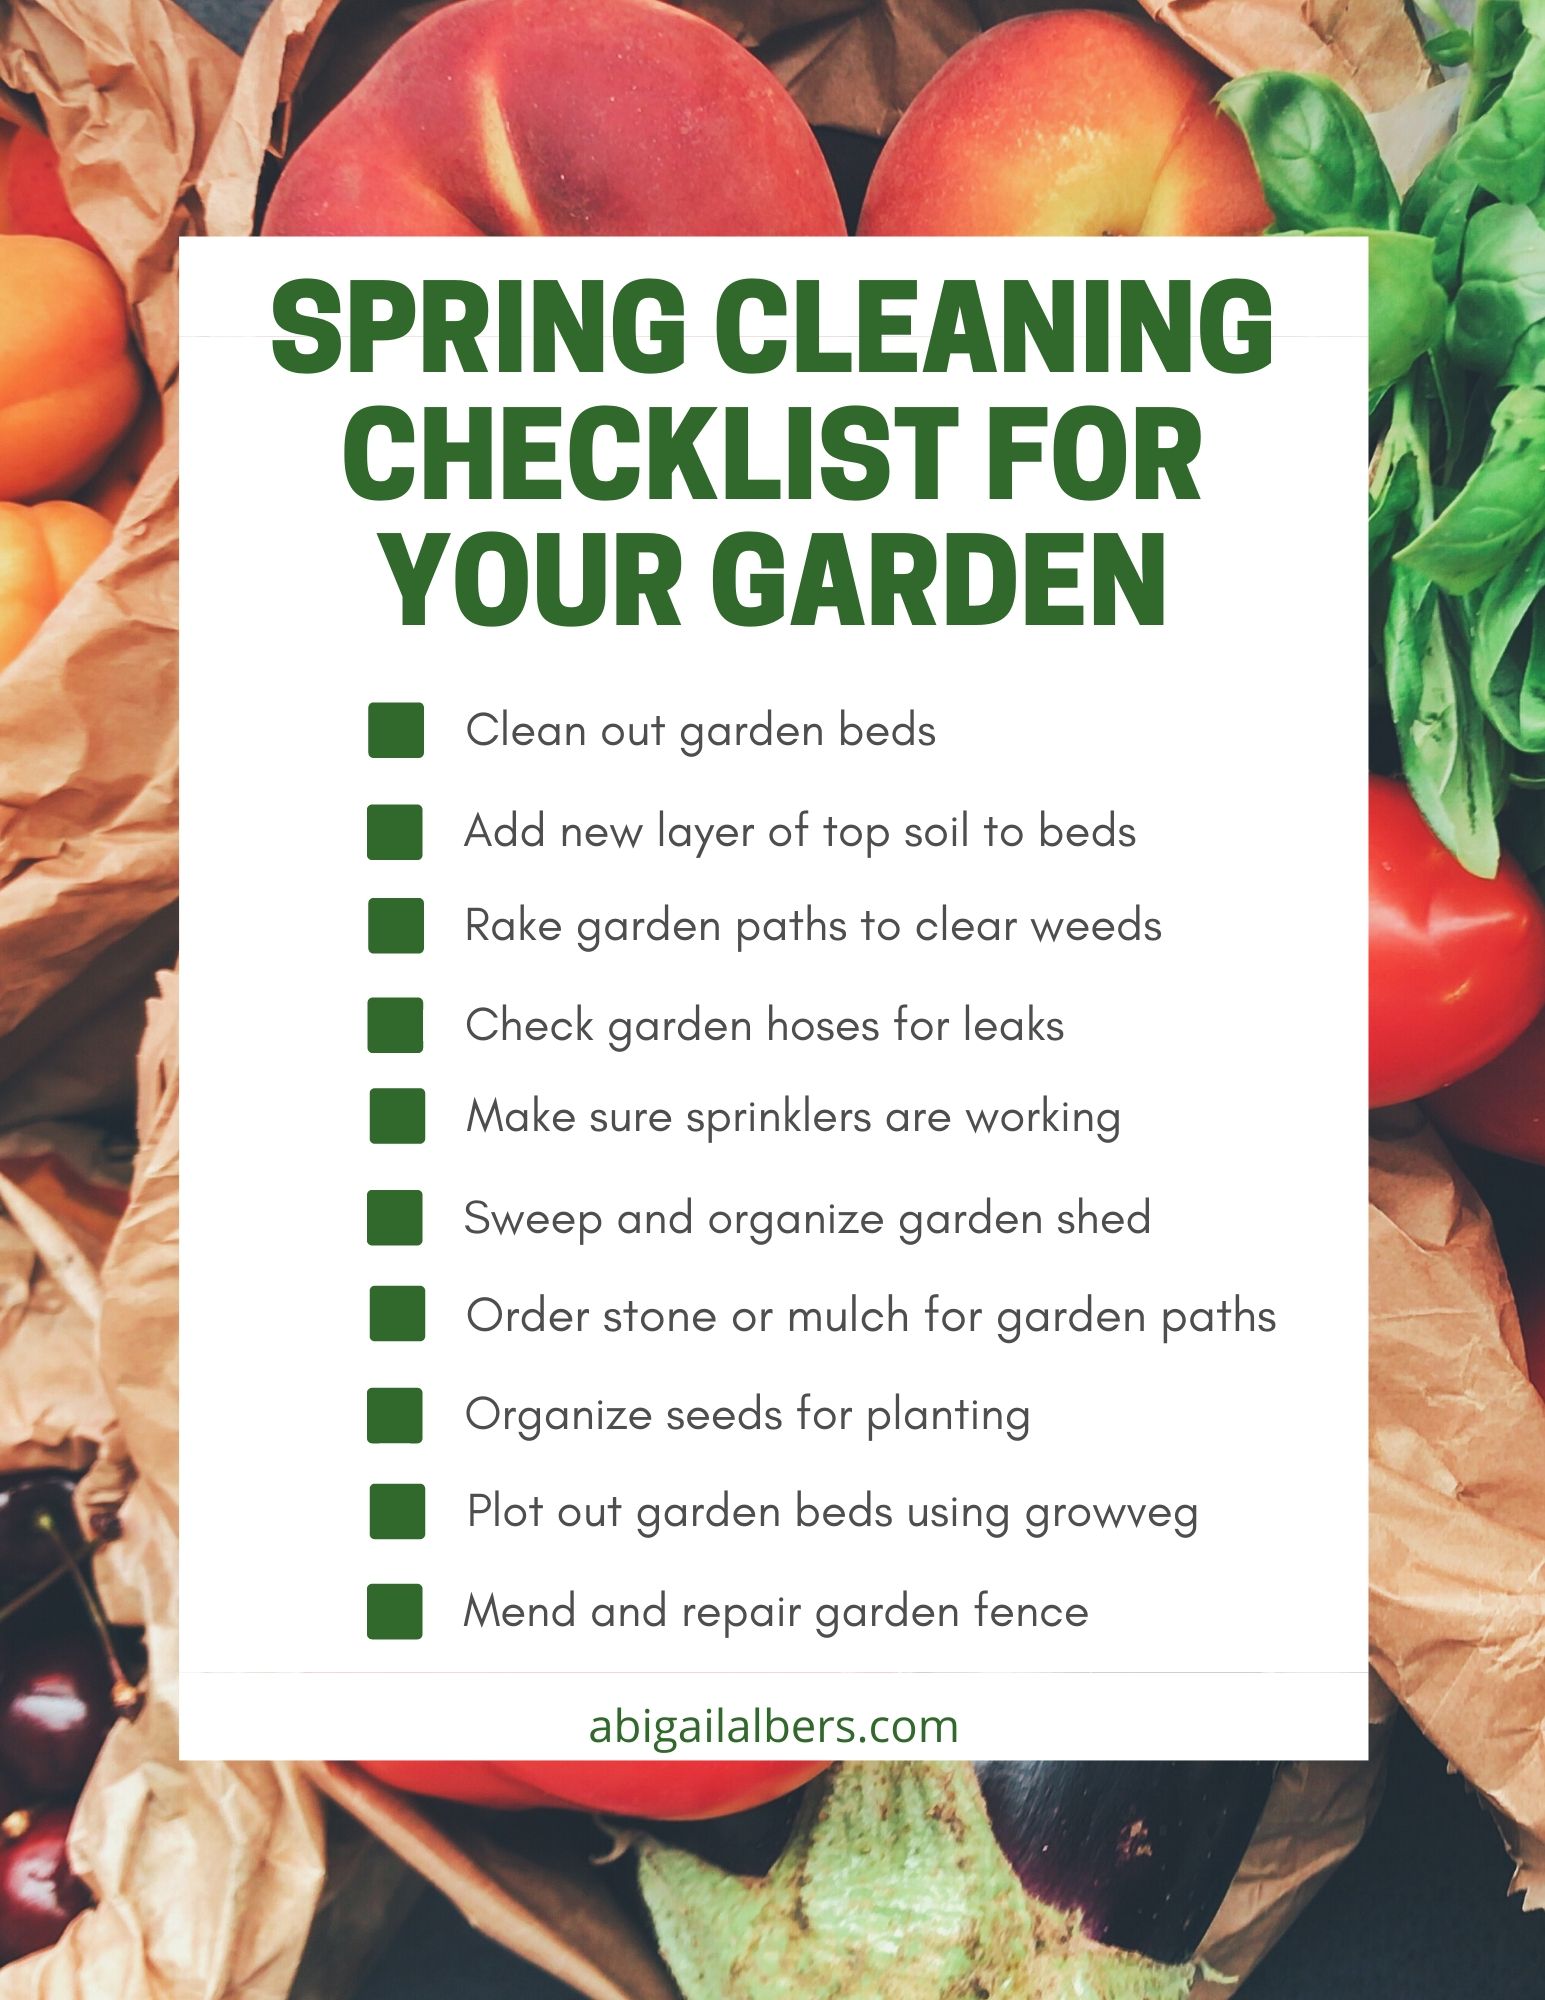 SPring Cleaning for your garden checklist